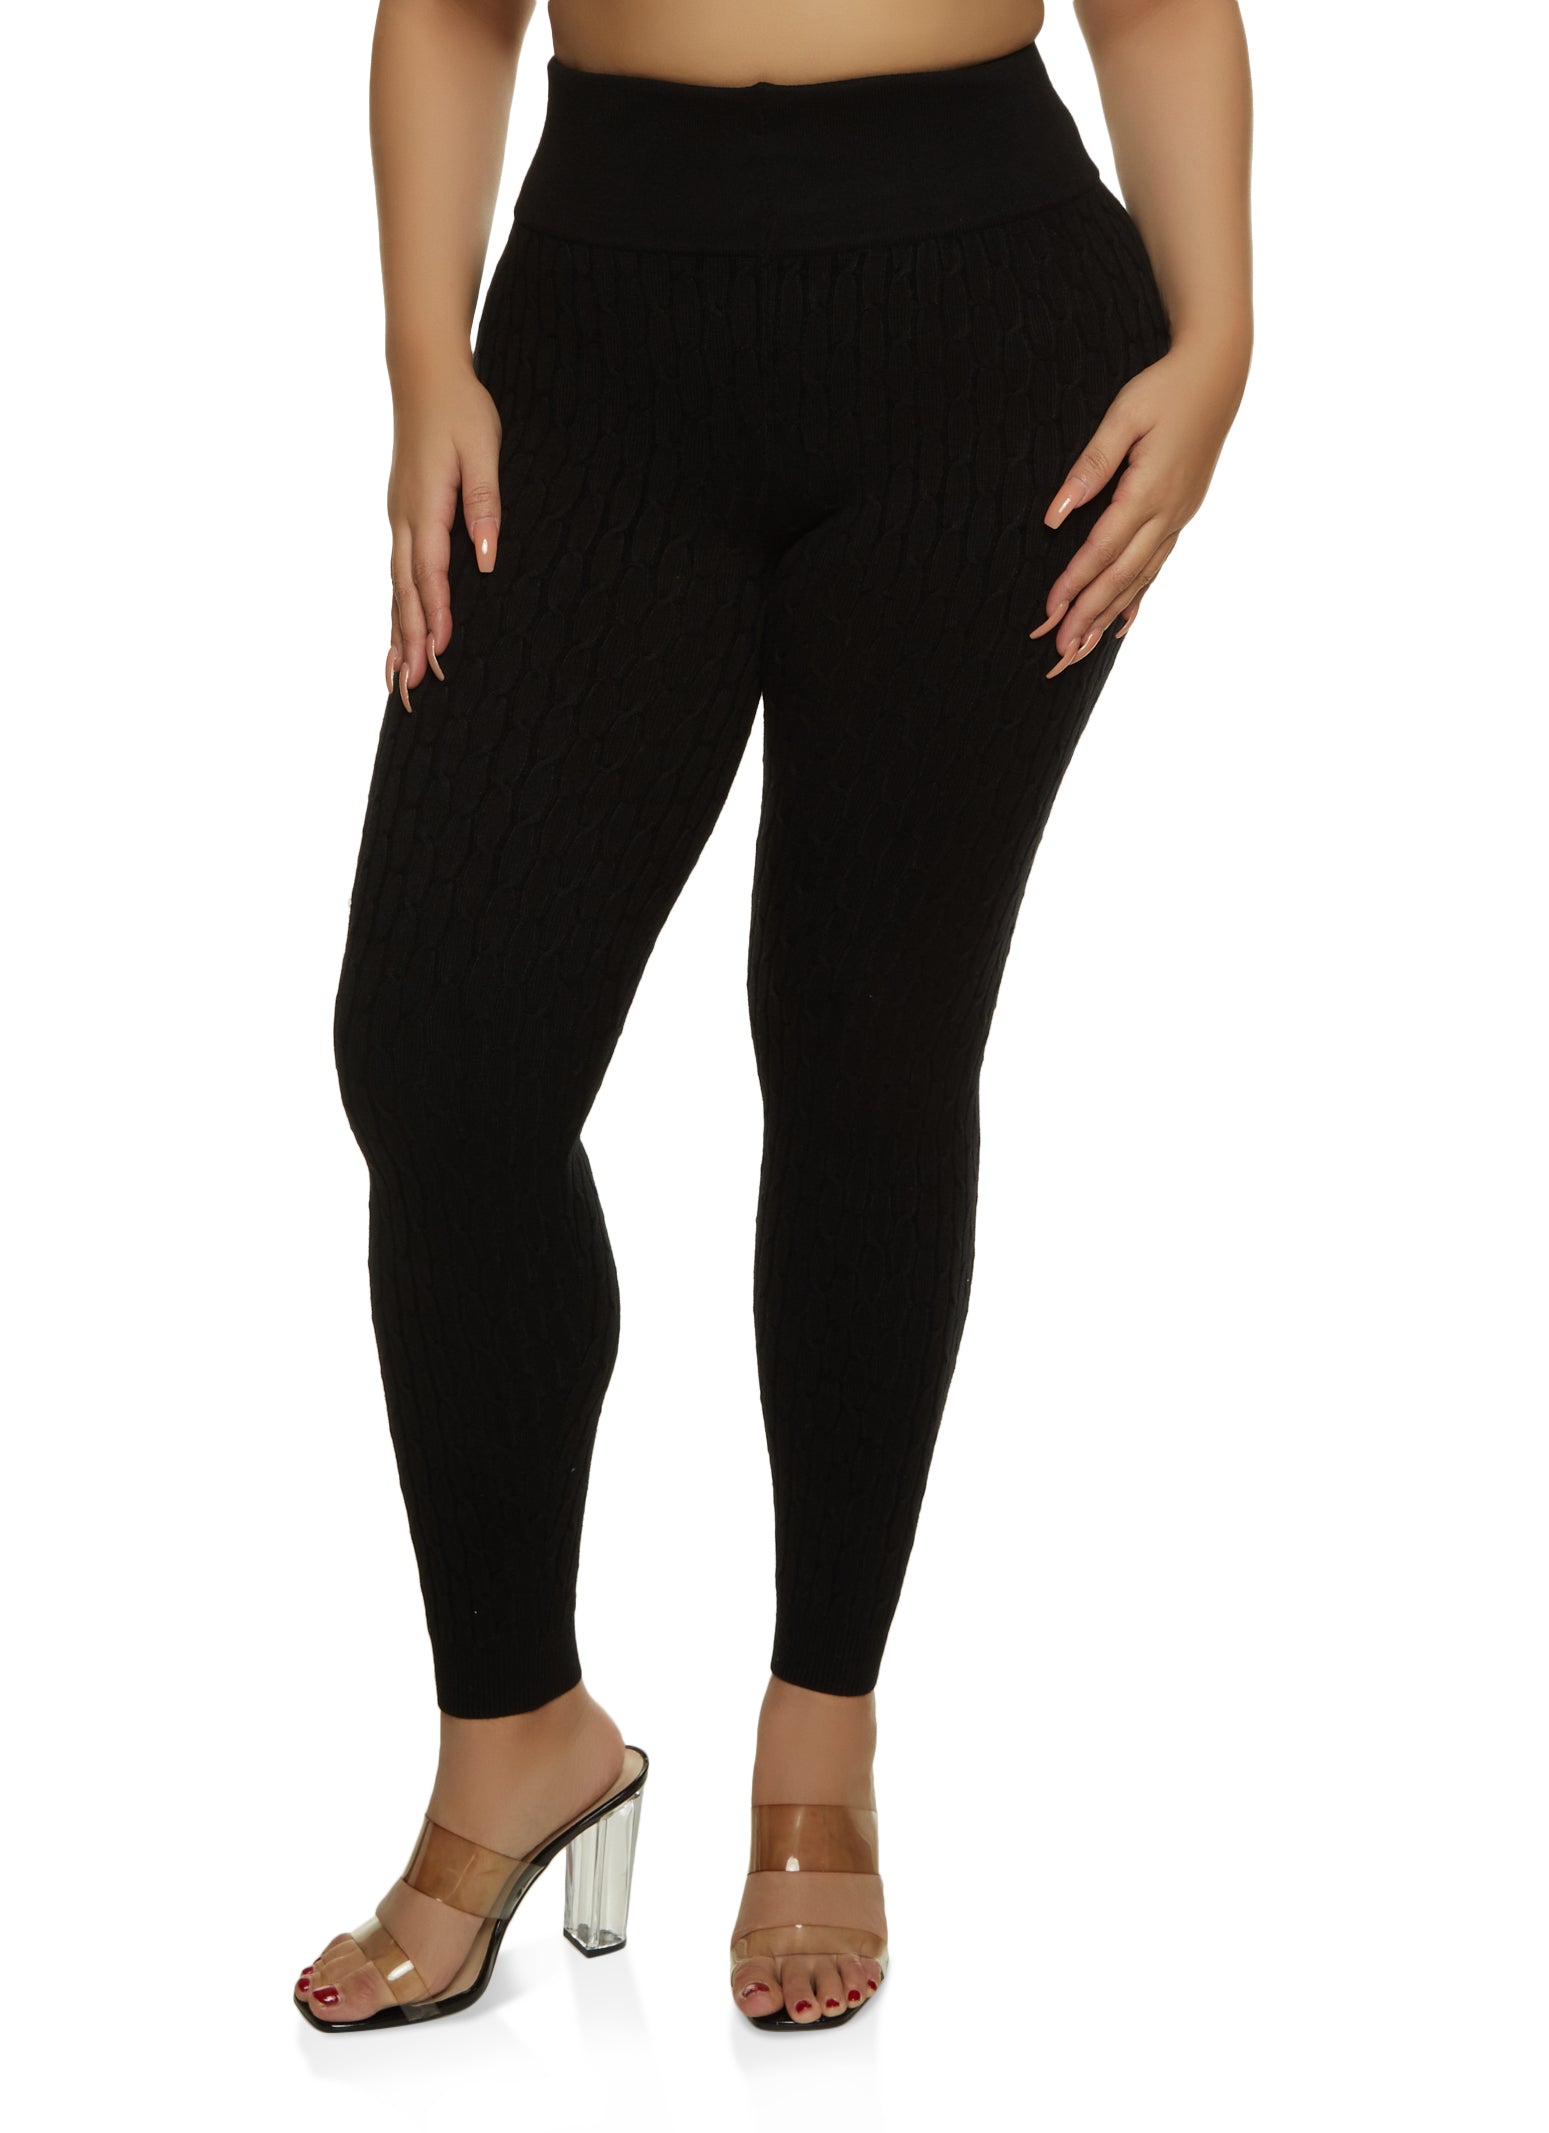 Women's Black Solid Jeggings With Pockets Size 16-20